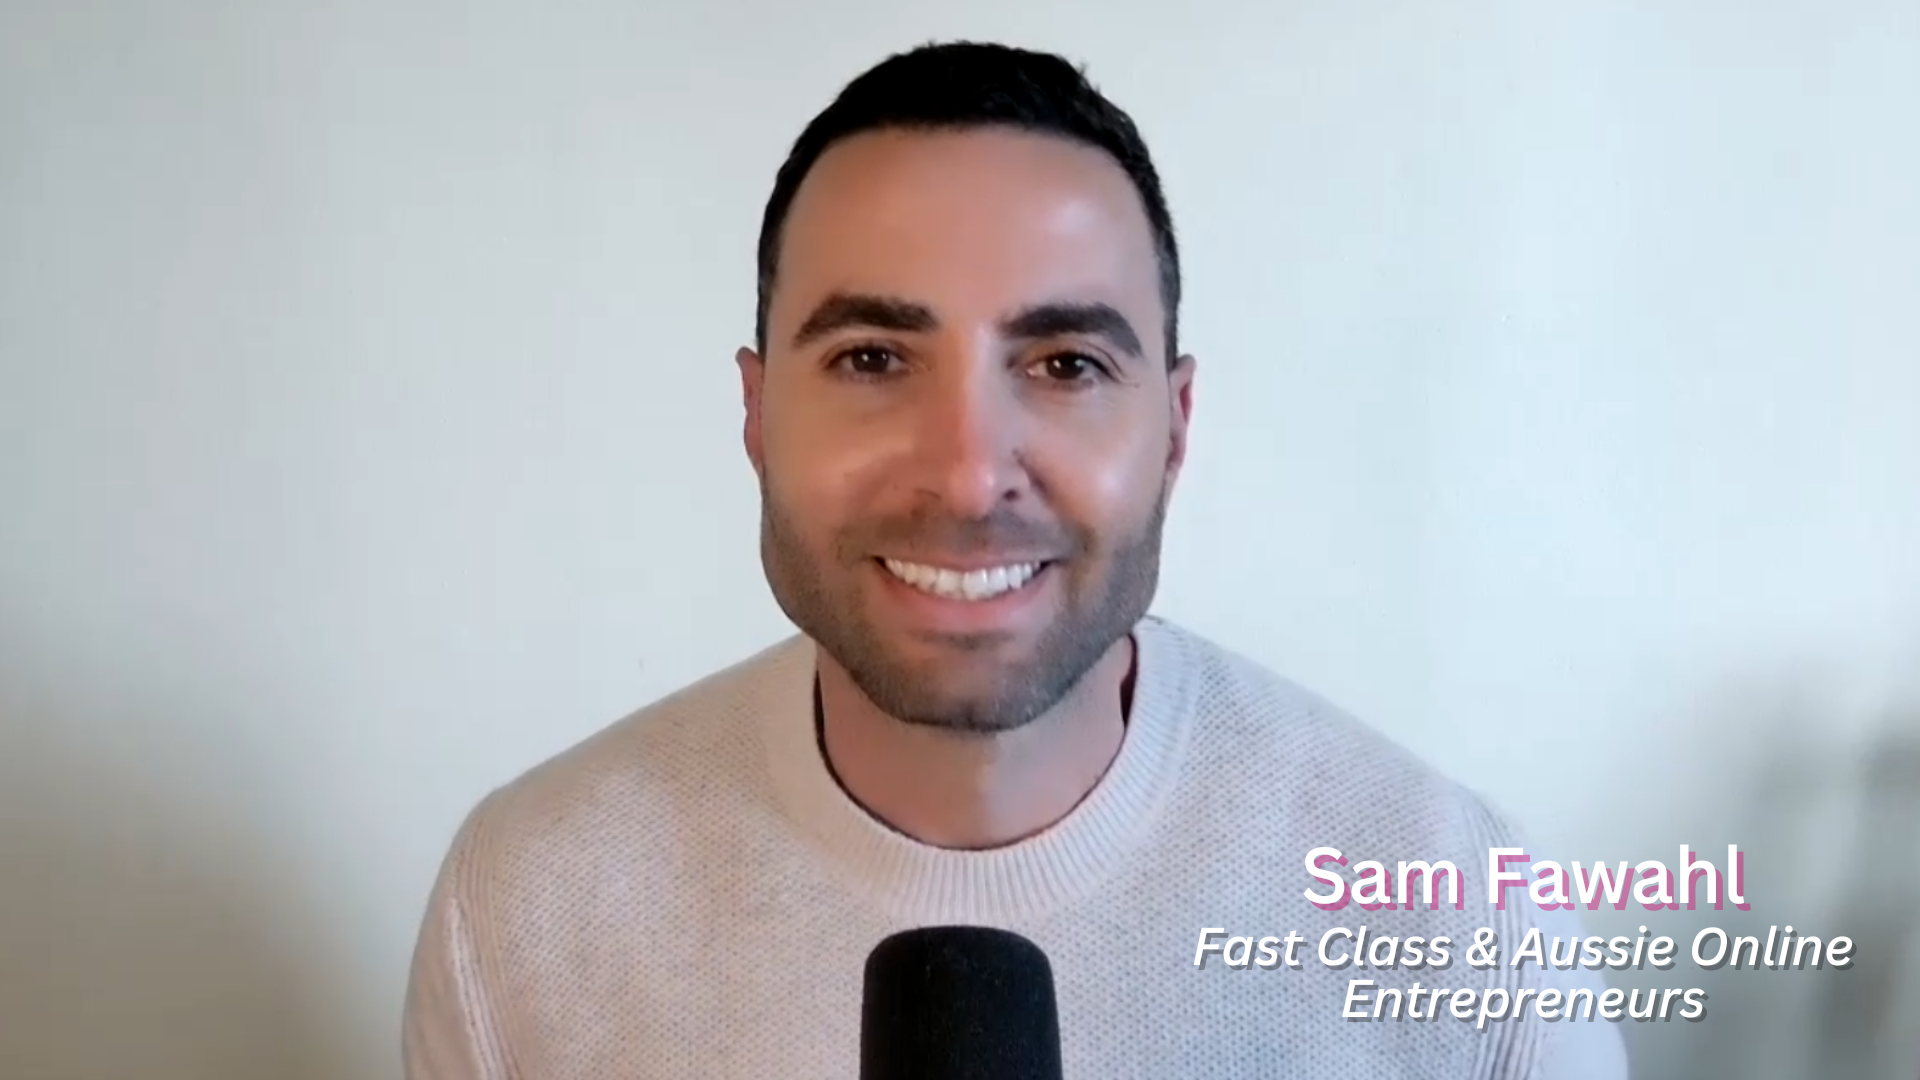 Load video: Sam Fawahl of Fast Class &amp; Aussie Entrepreneur shares his experience working with Karina at Ecomco!